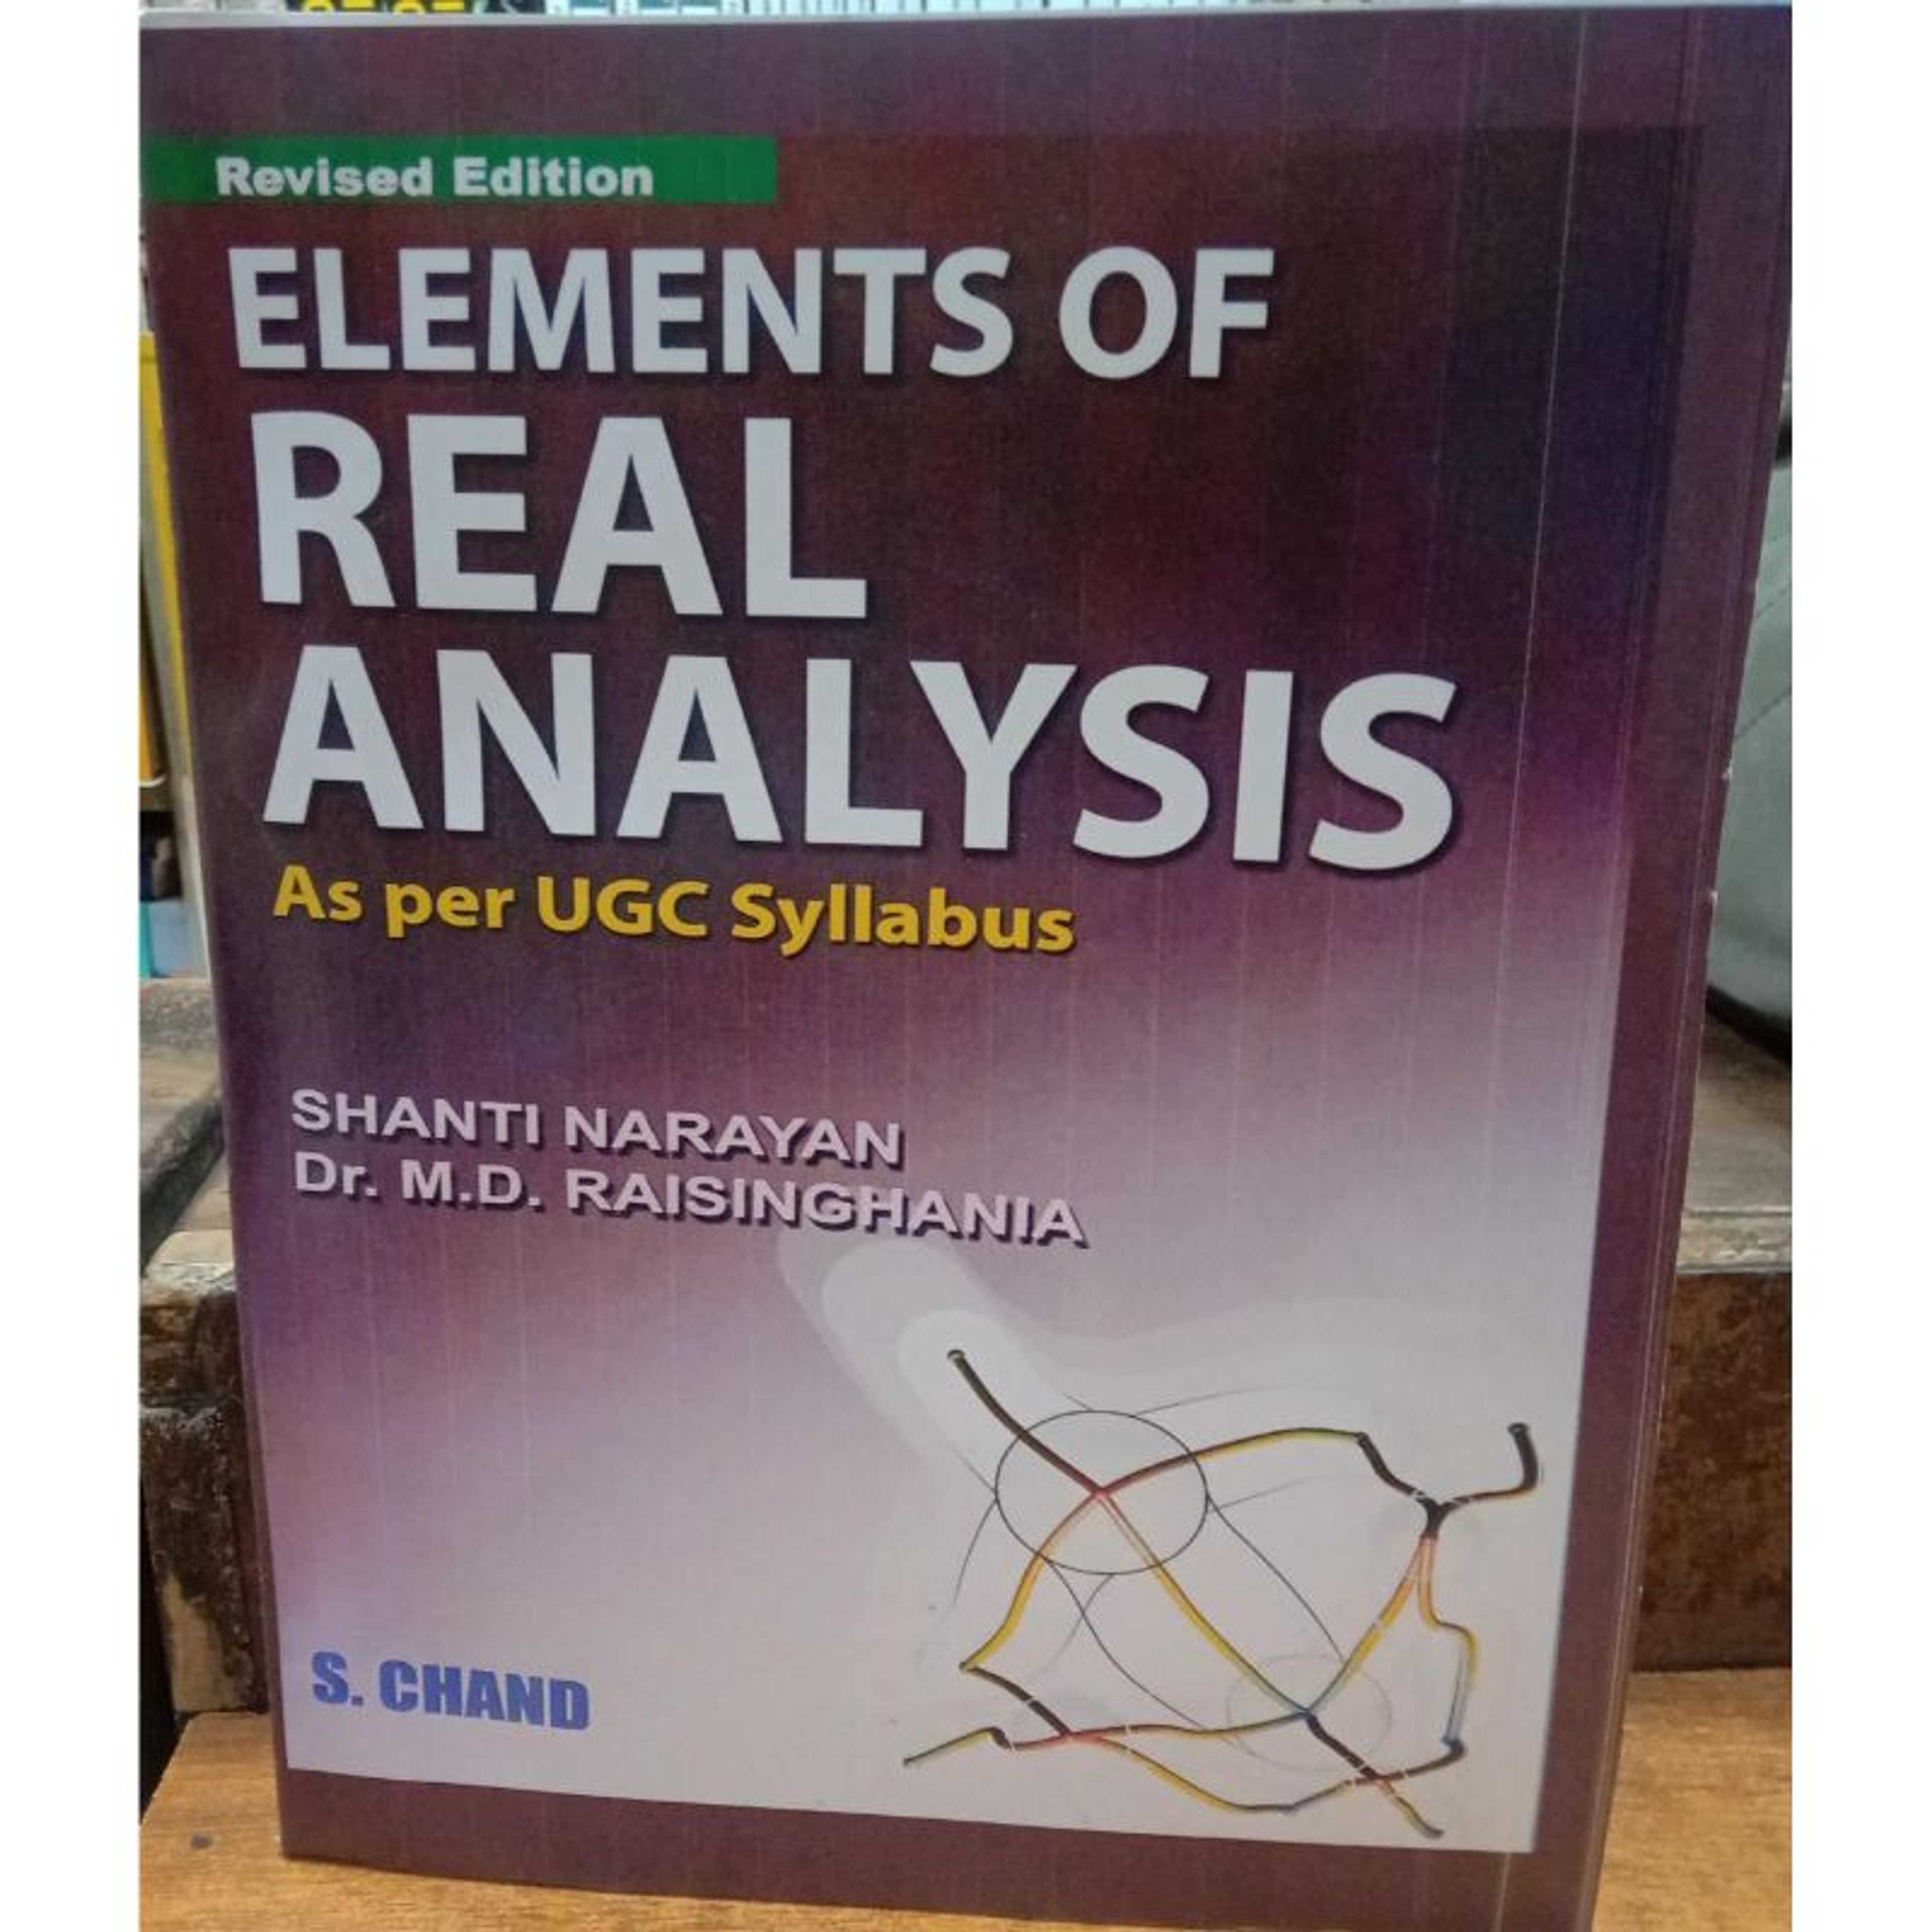 Elements of real analysis super ugc syllabus s.chand 